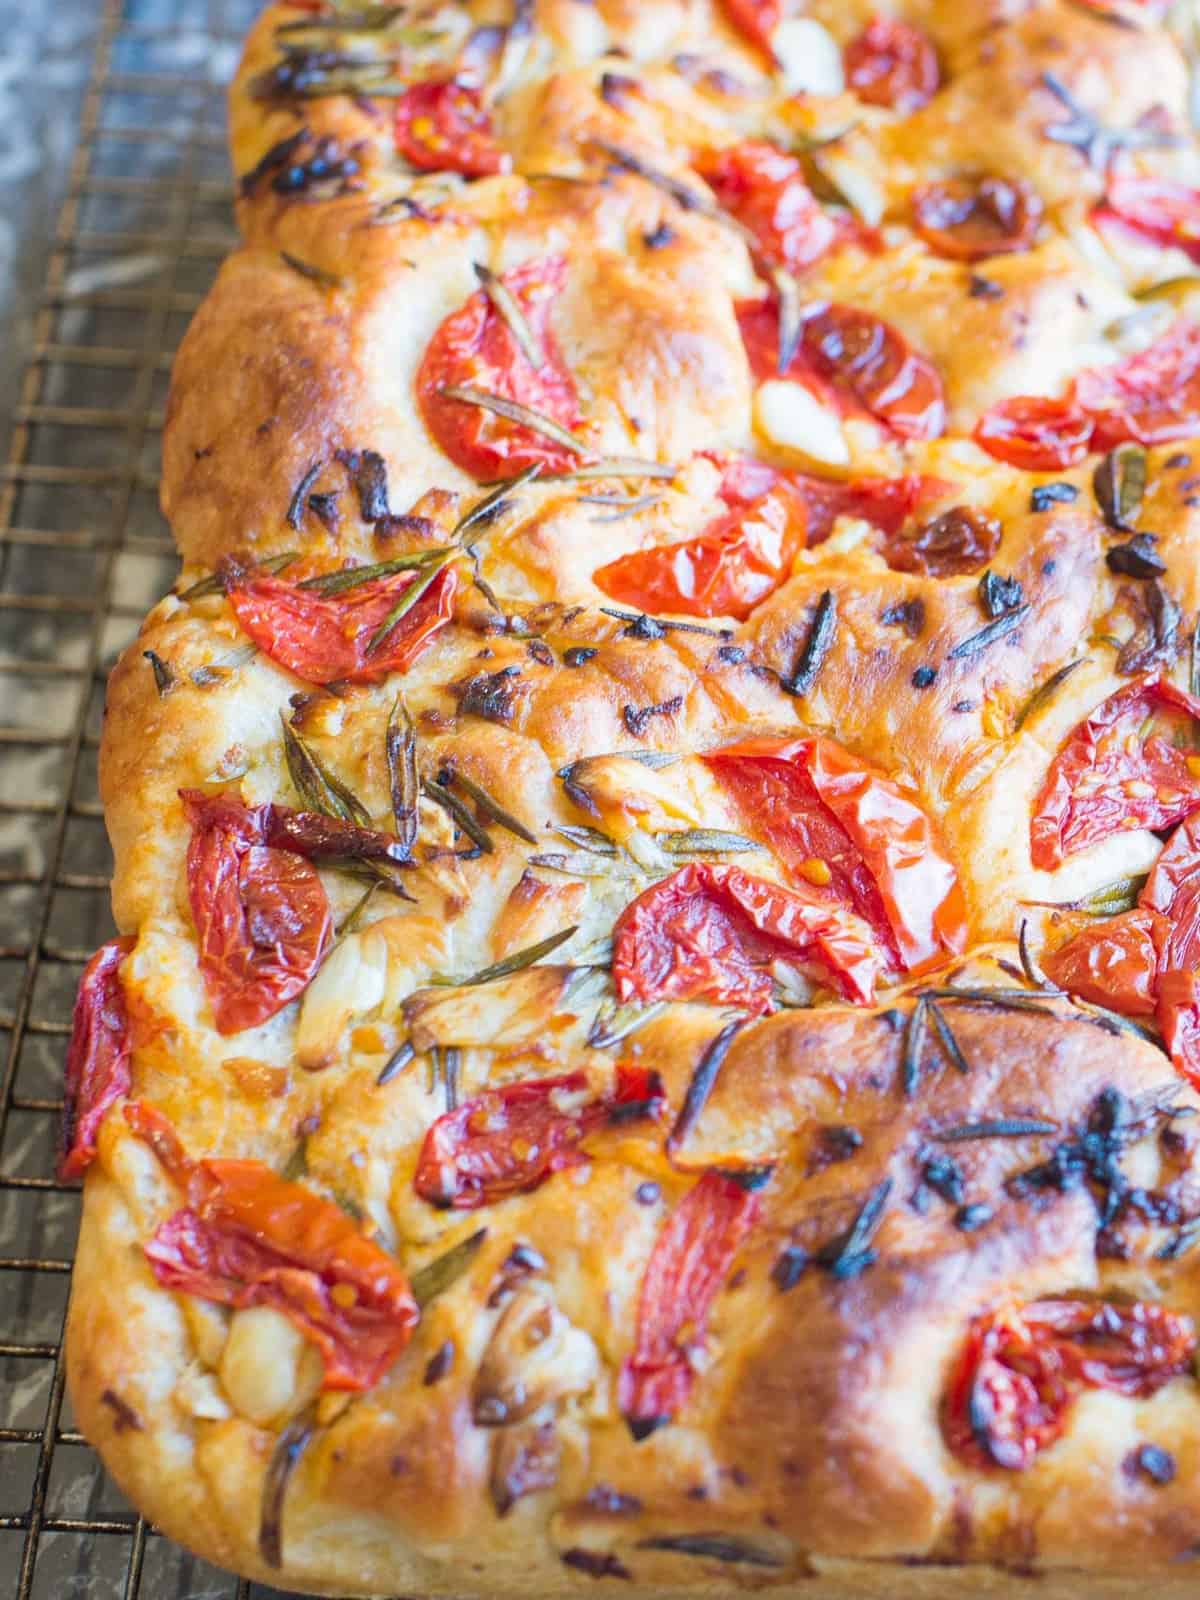 Fresh focaccia bread is easy to make and makes a fantastic appetizer. This focaccia bread recipe is easy. Keep it simple topped with rosemary or try this garlic, rosemary, and tomato topping.